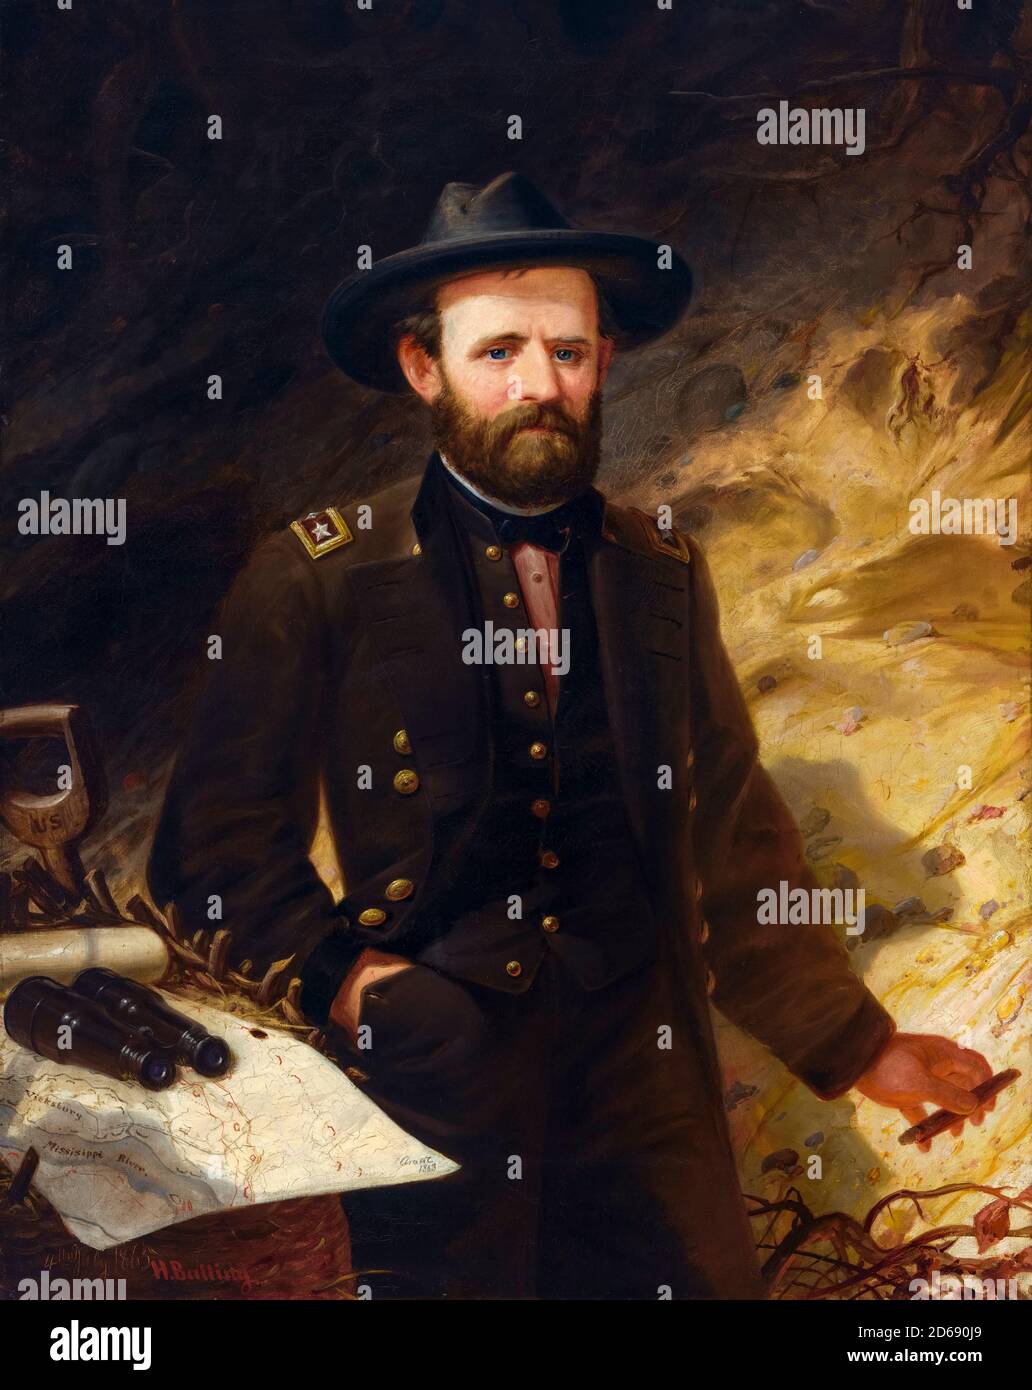 Ulysses S Grant (1822-1885), American soldier and politician who served as the eighteenth President of the United States, portrait painting in military uniform by Ole Peter Hansen Balling, 1865 Stock Photo